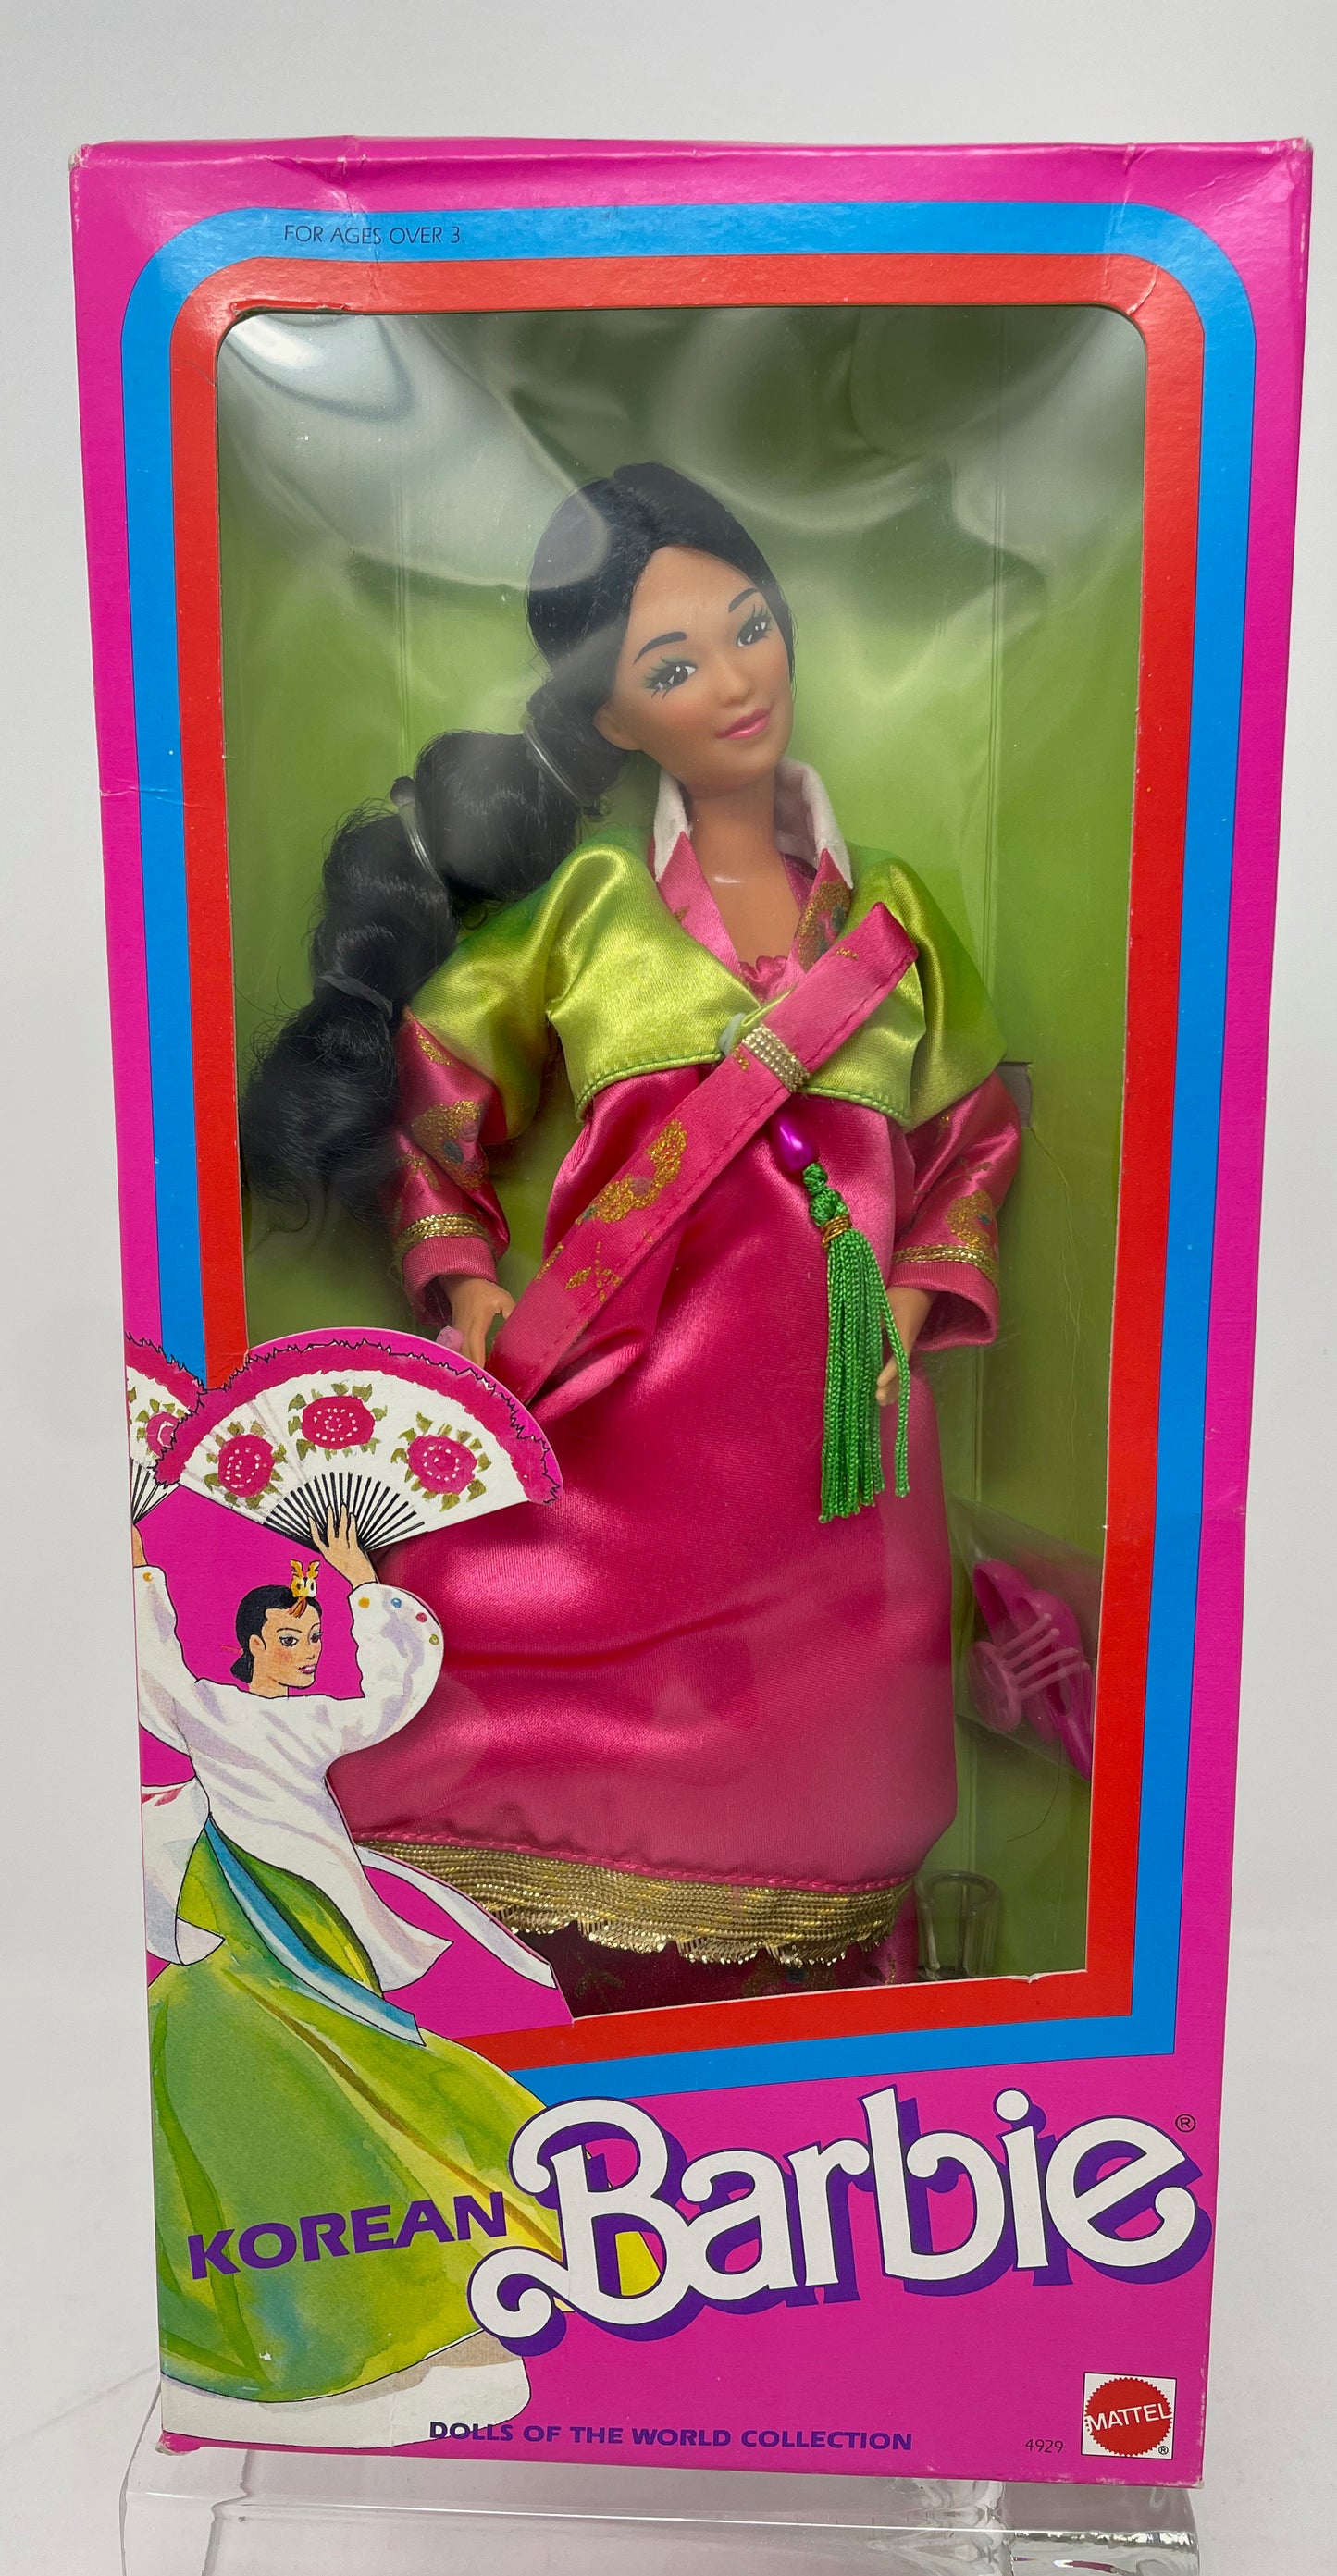 KOREAN BARBIE - DOLLS OF THE WORLD COLLECTION - SPECIAL EDITION - #4929 - MATTEL 1987